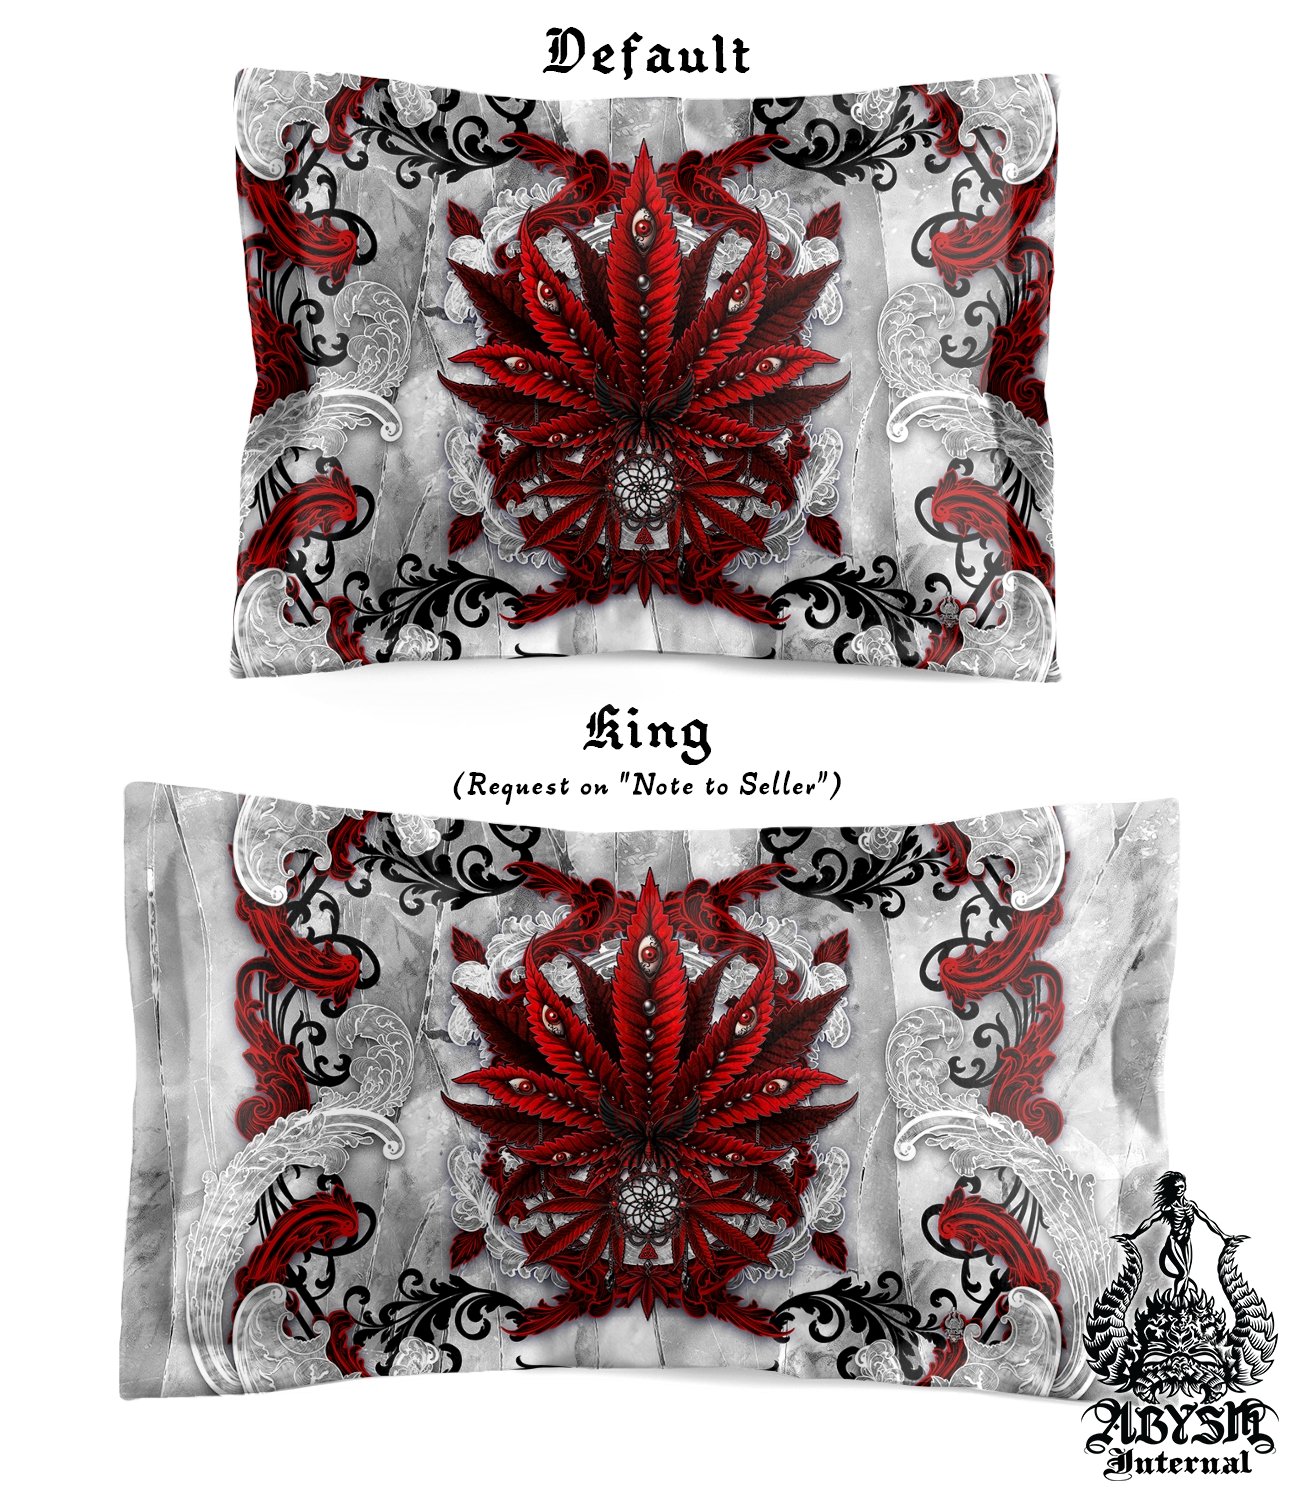 Weed Bedding Set, Comforter and Duvet, Cannabis Bed Cover, Marijuana Bedroom Decor, King, Queen and Twin Size, 420 Room Art - Bloody White Goth - Abysm Internal